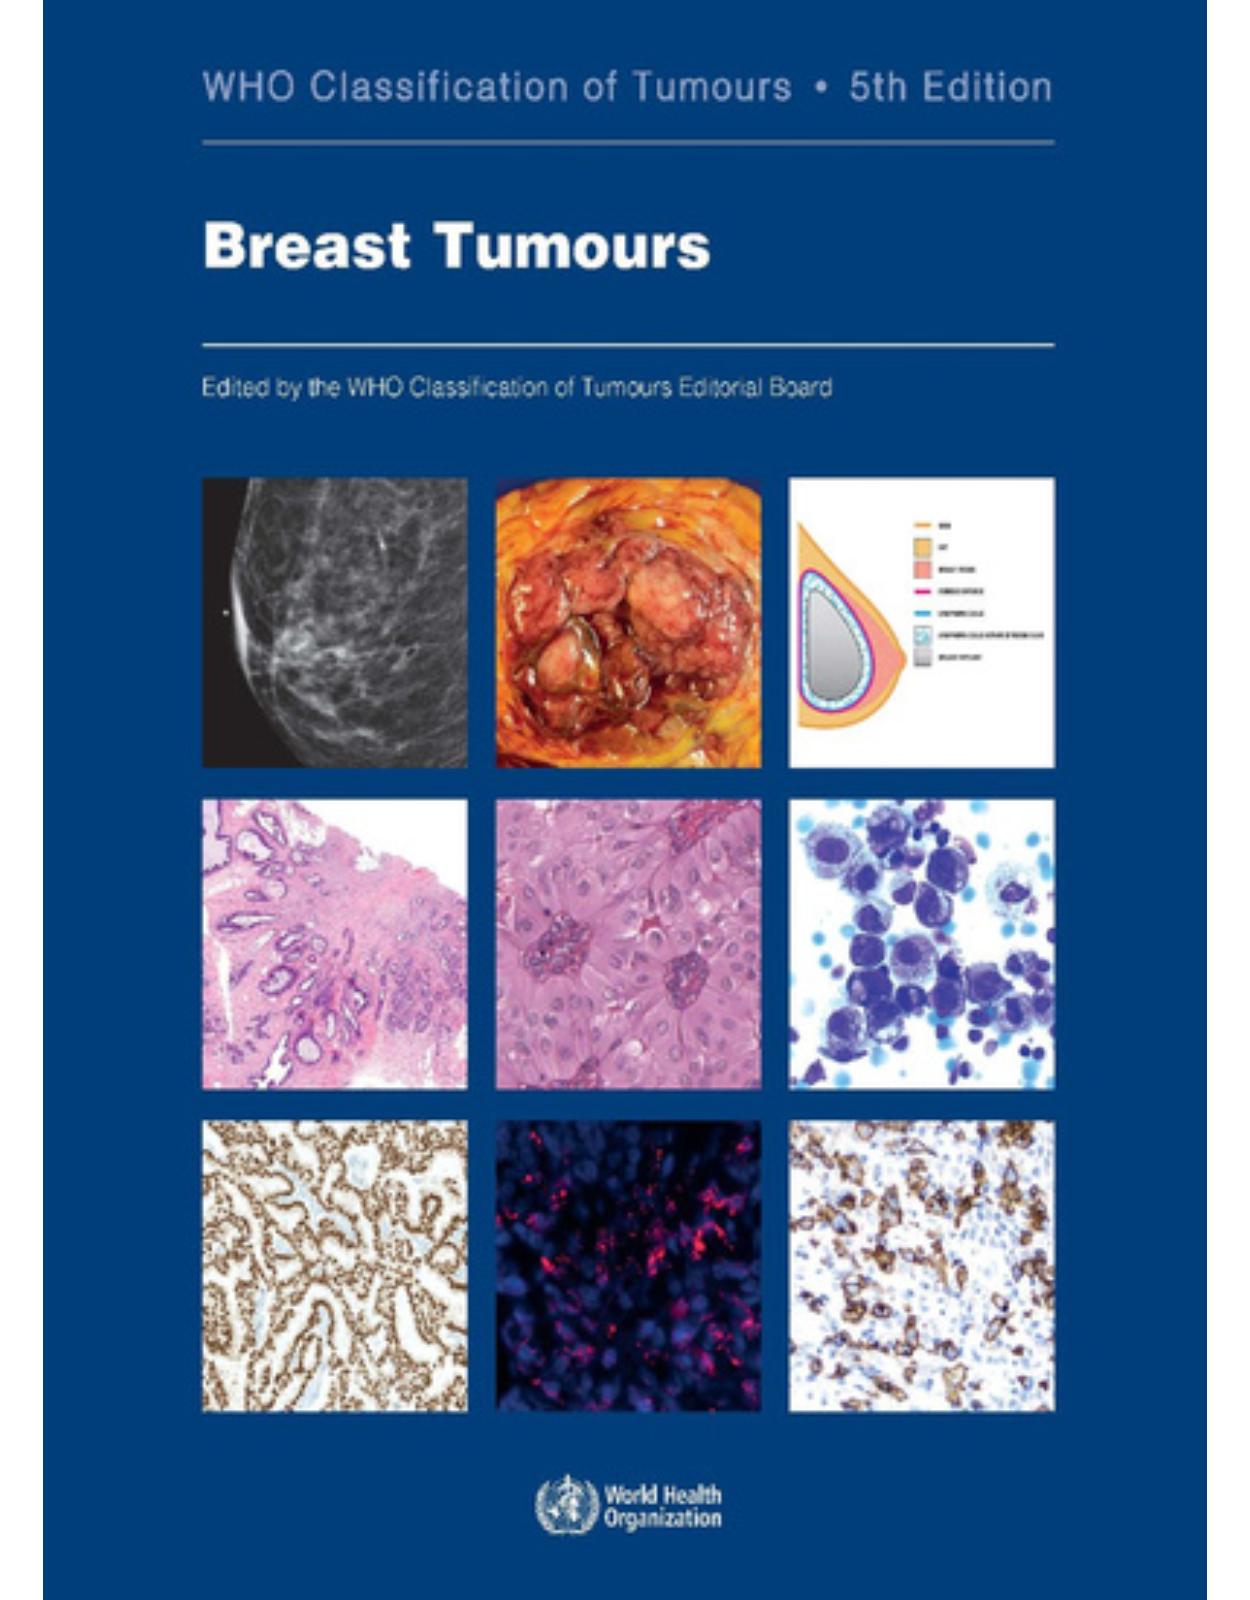 WHO Classification of Breast Tumours. Fifth Edition   